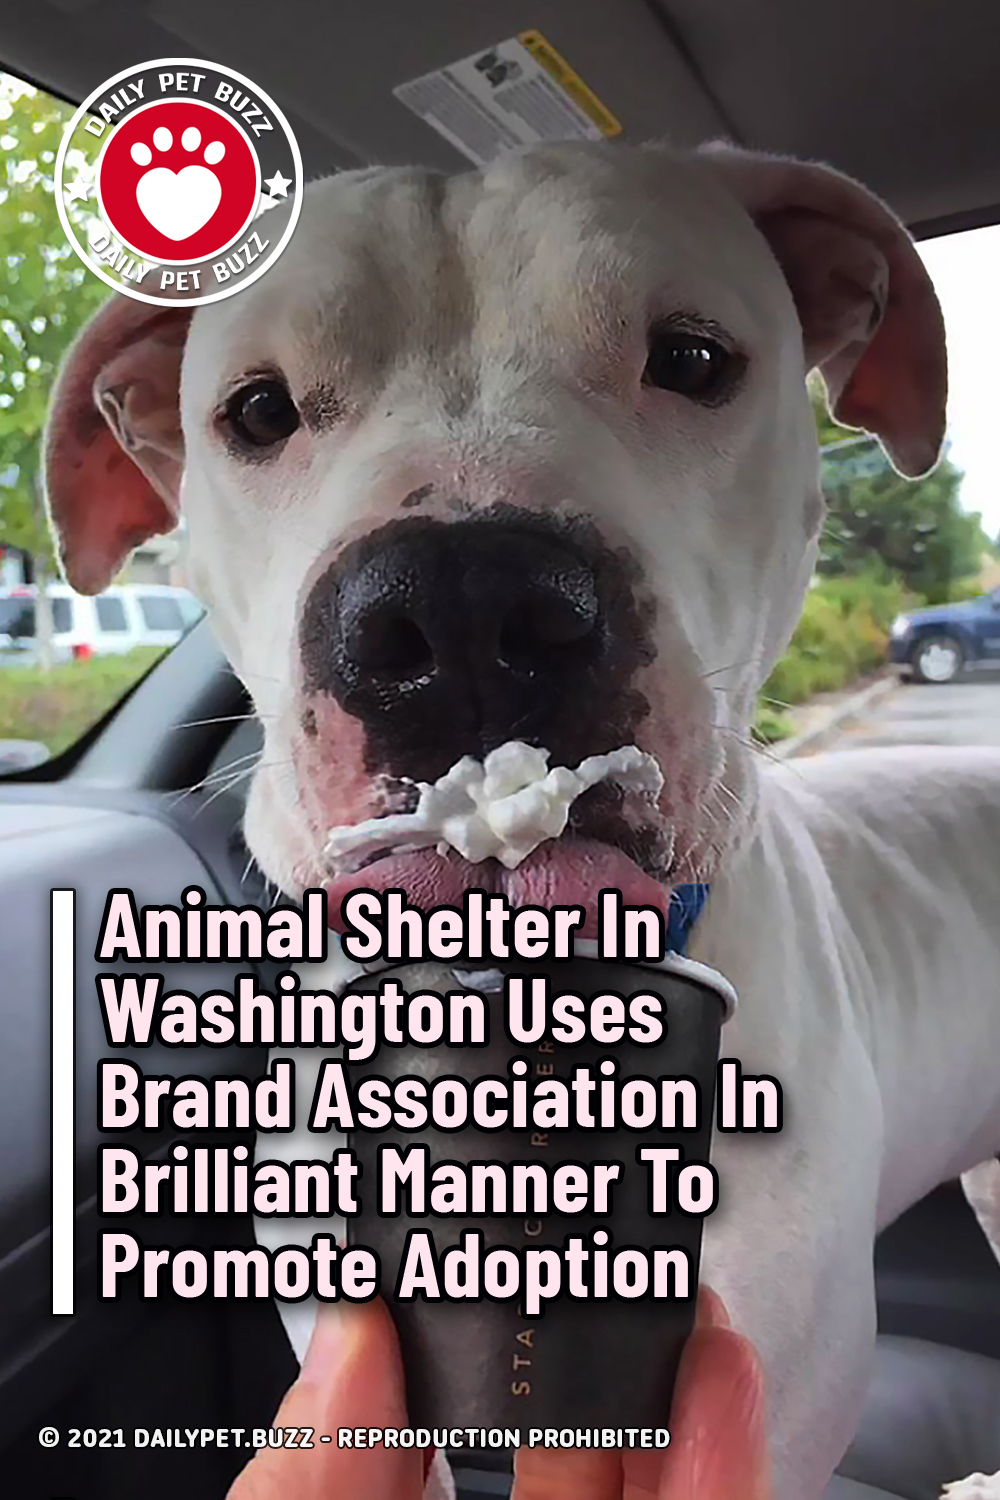 Animal Shelter In Washington Uses Brand Association In Brilliant Manner To Promote Adoption